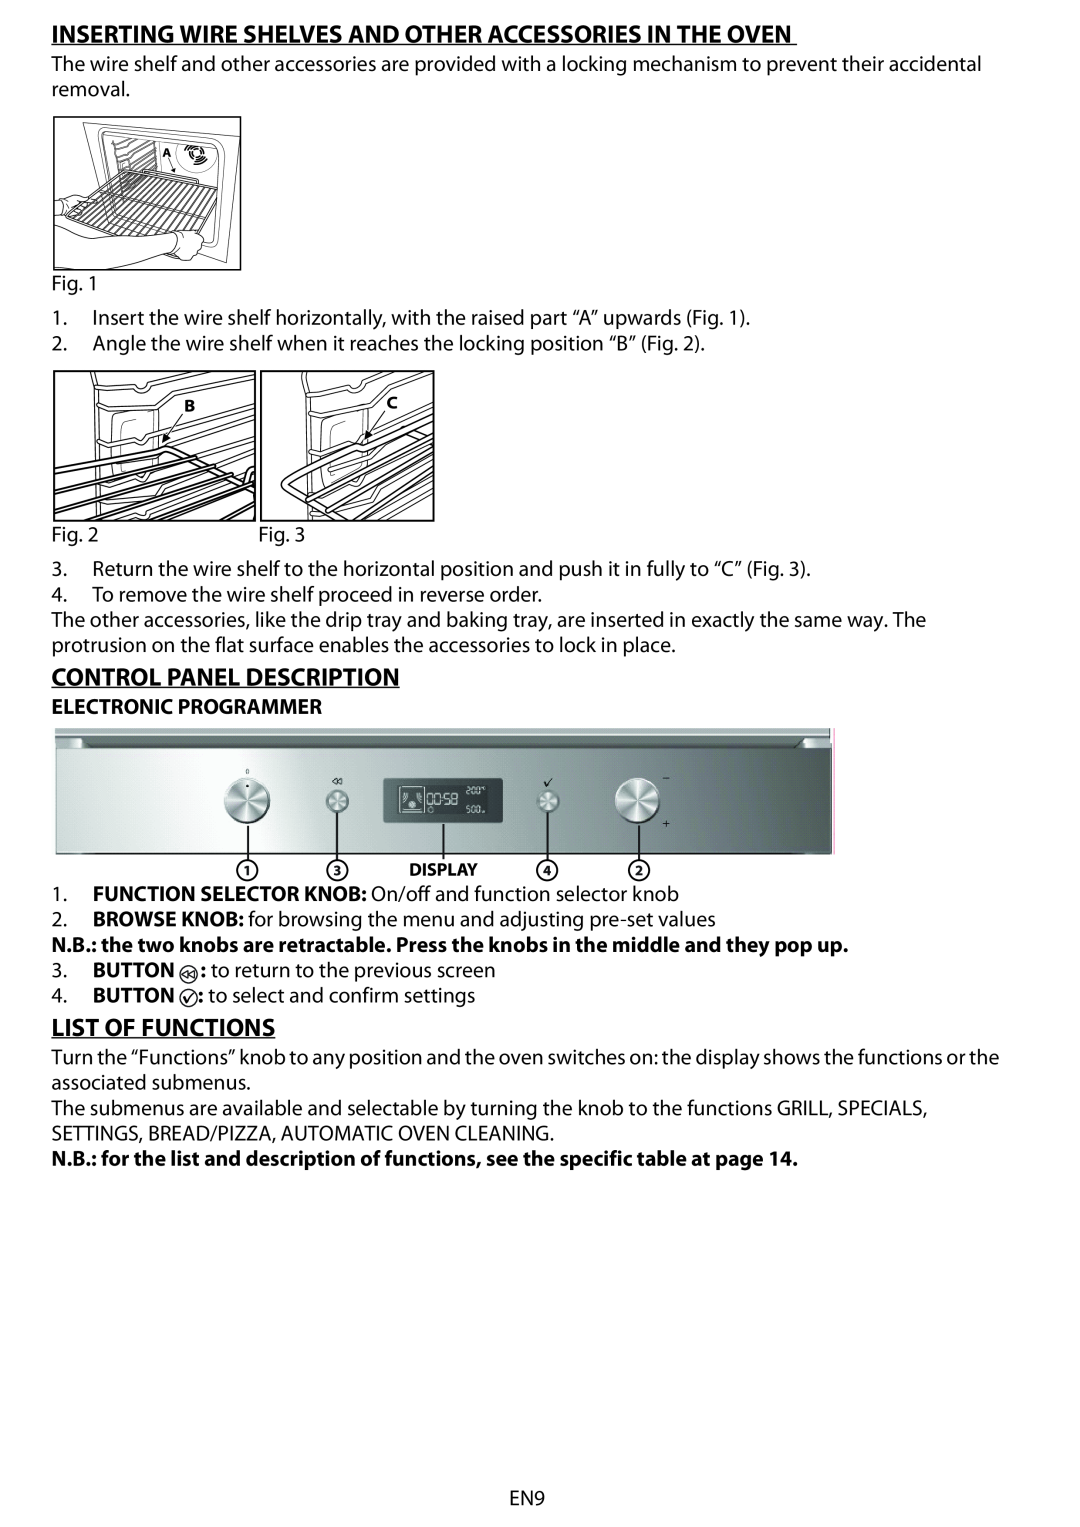 Whirlpool AKZM 775 Inserting Wire Shelves And Other Accessories In The Oven, Control Panel Description, List Of Functions 